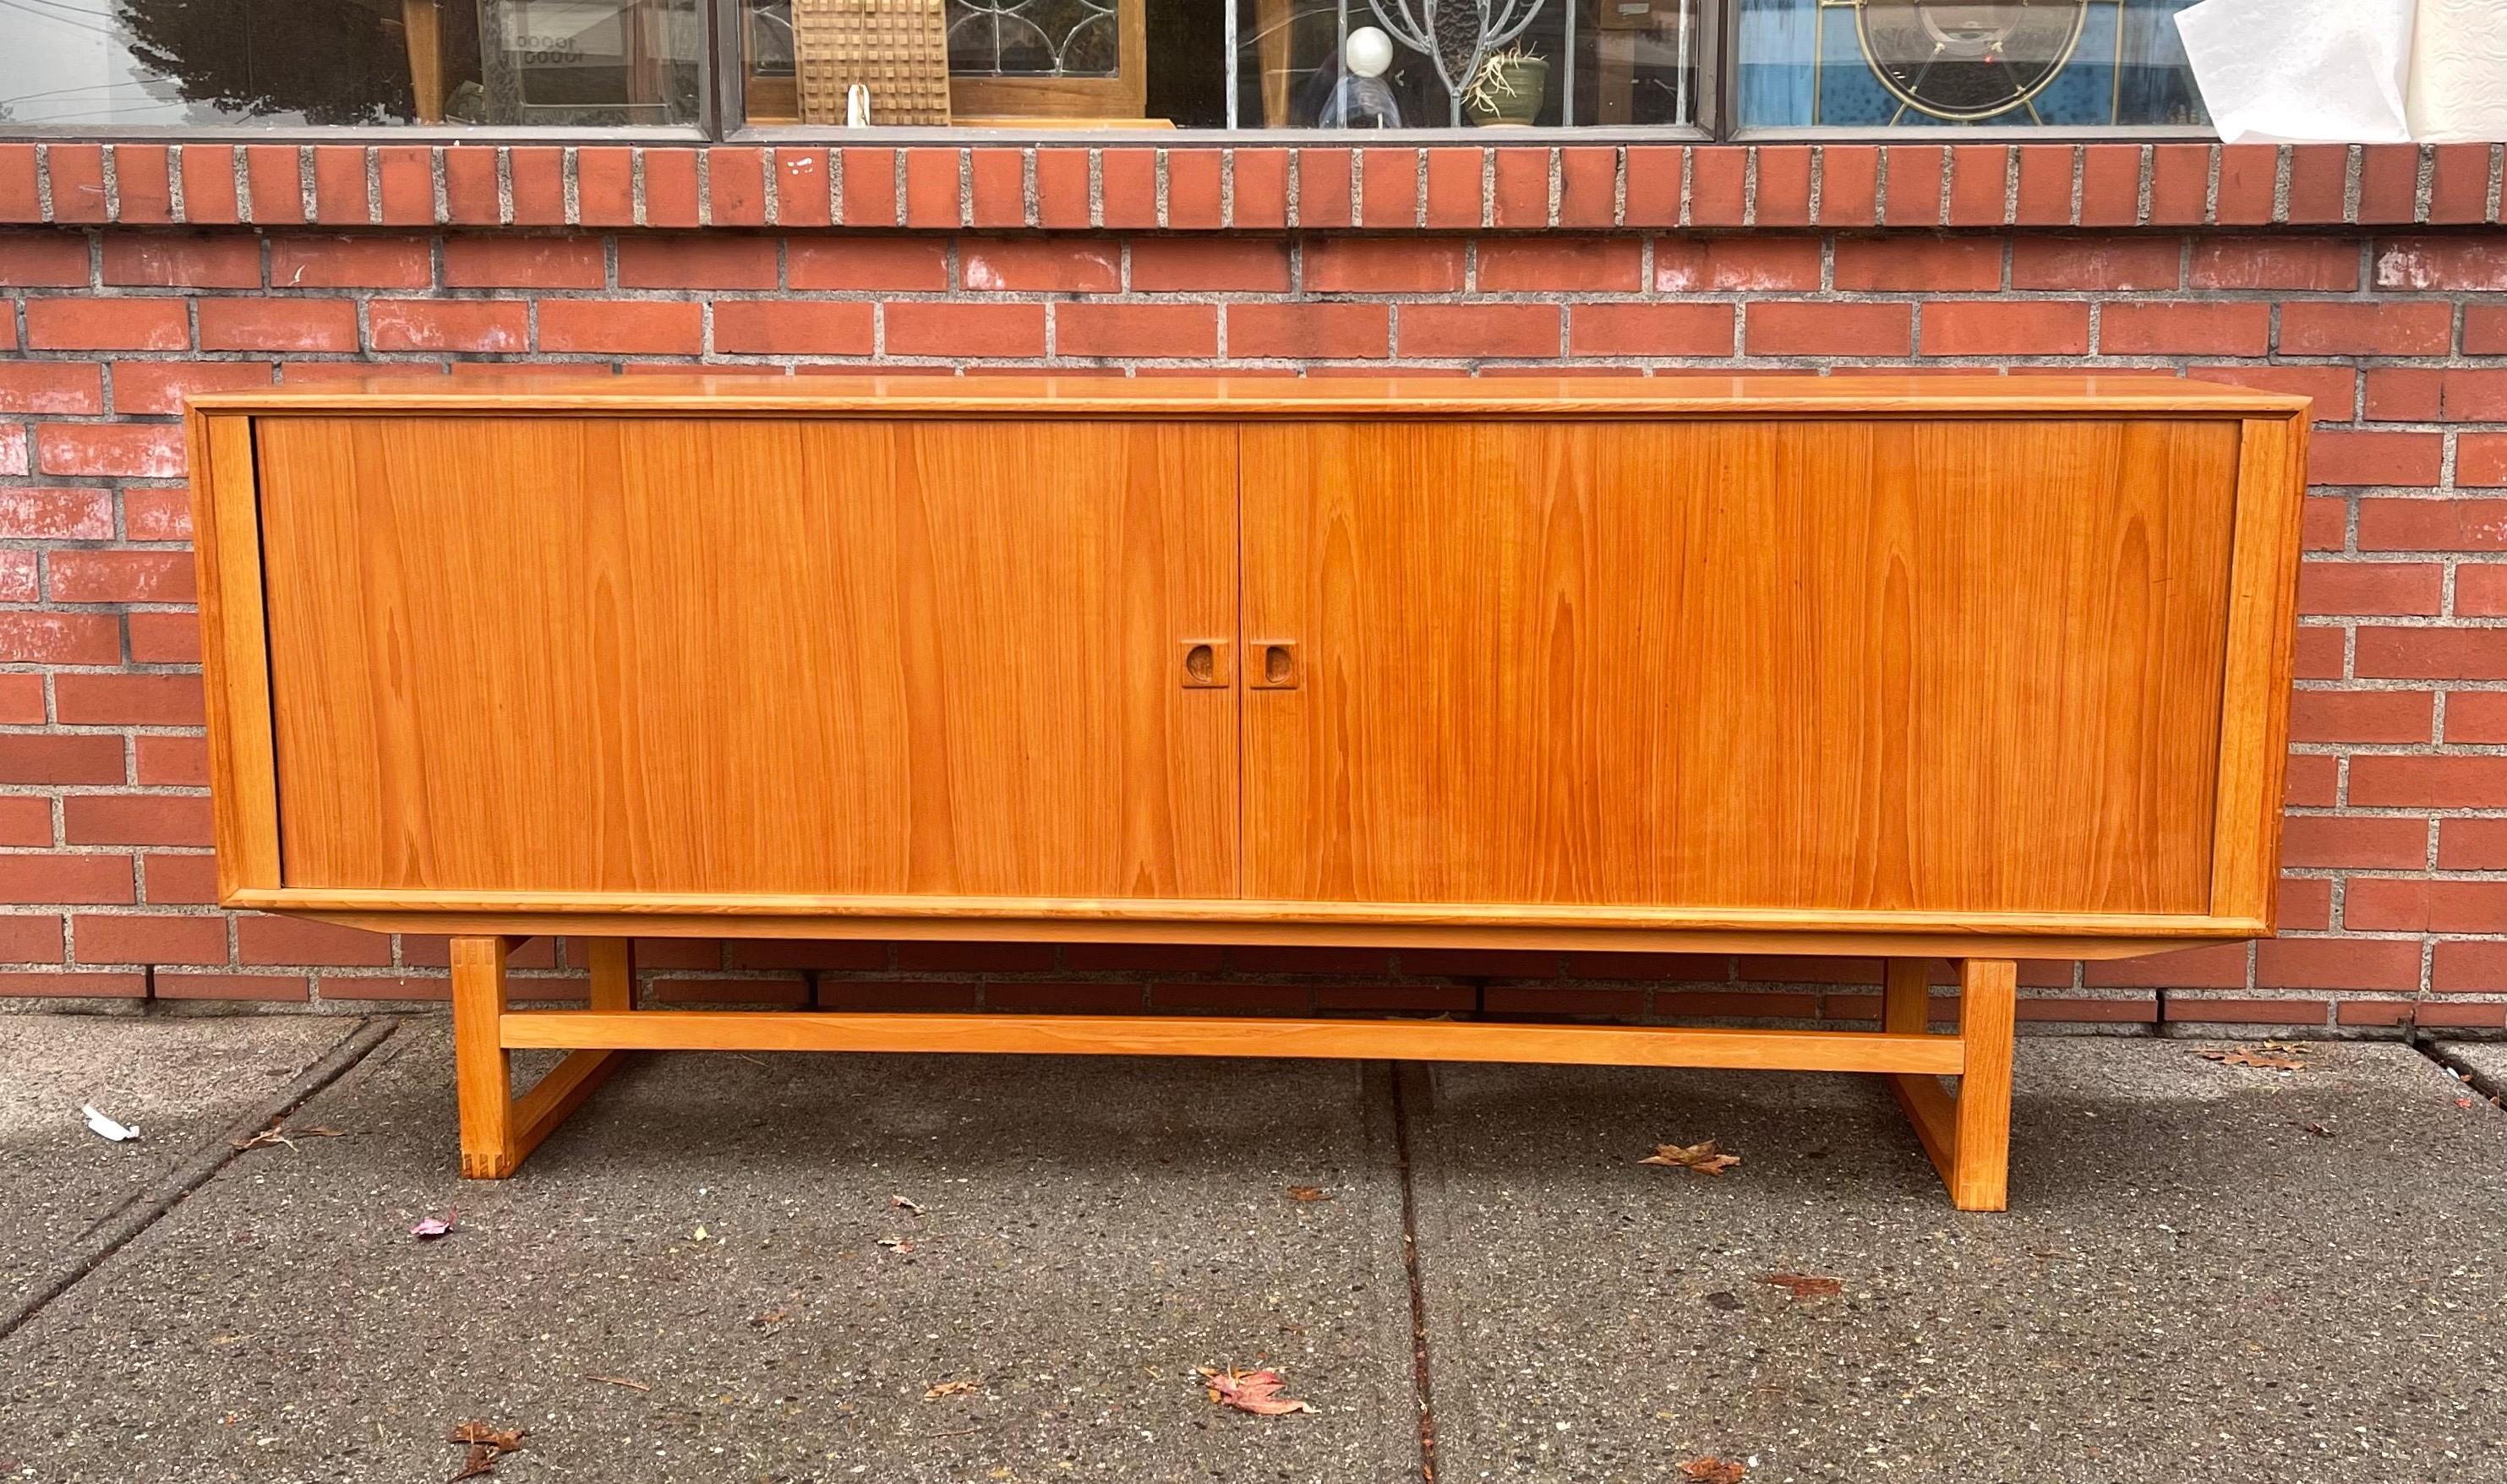 Late 20th Century Vintage Danish Mid-Century Modern Teak Credenza with Shelves and Drawer